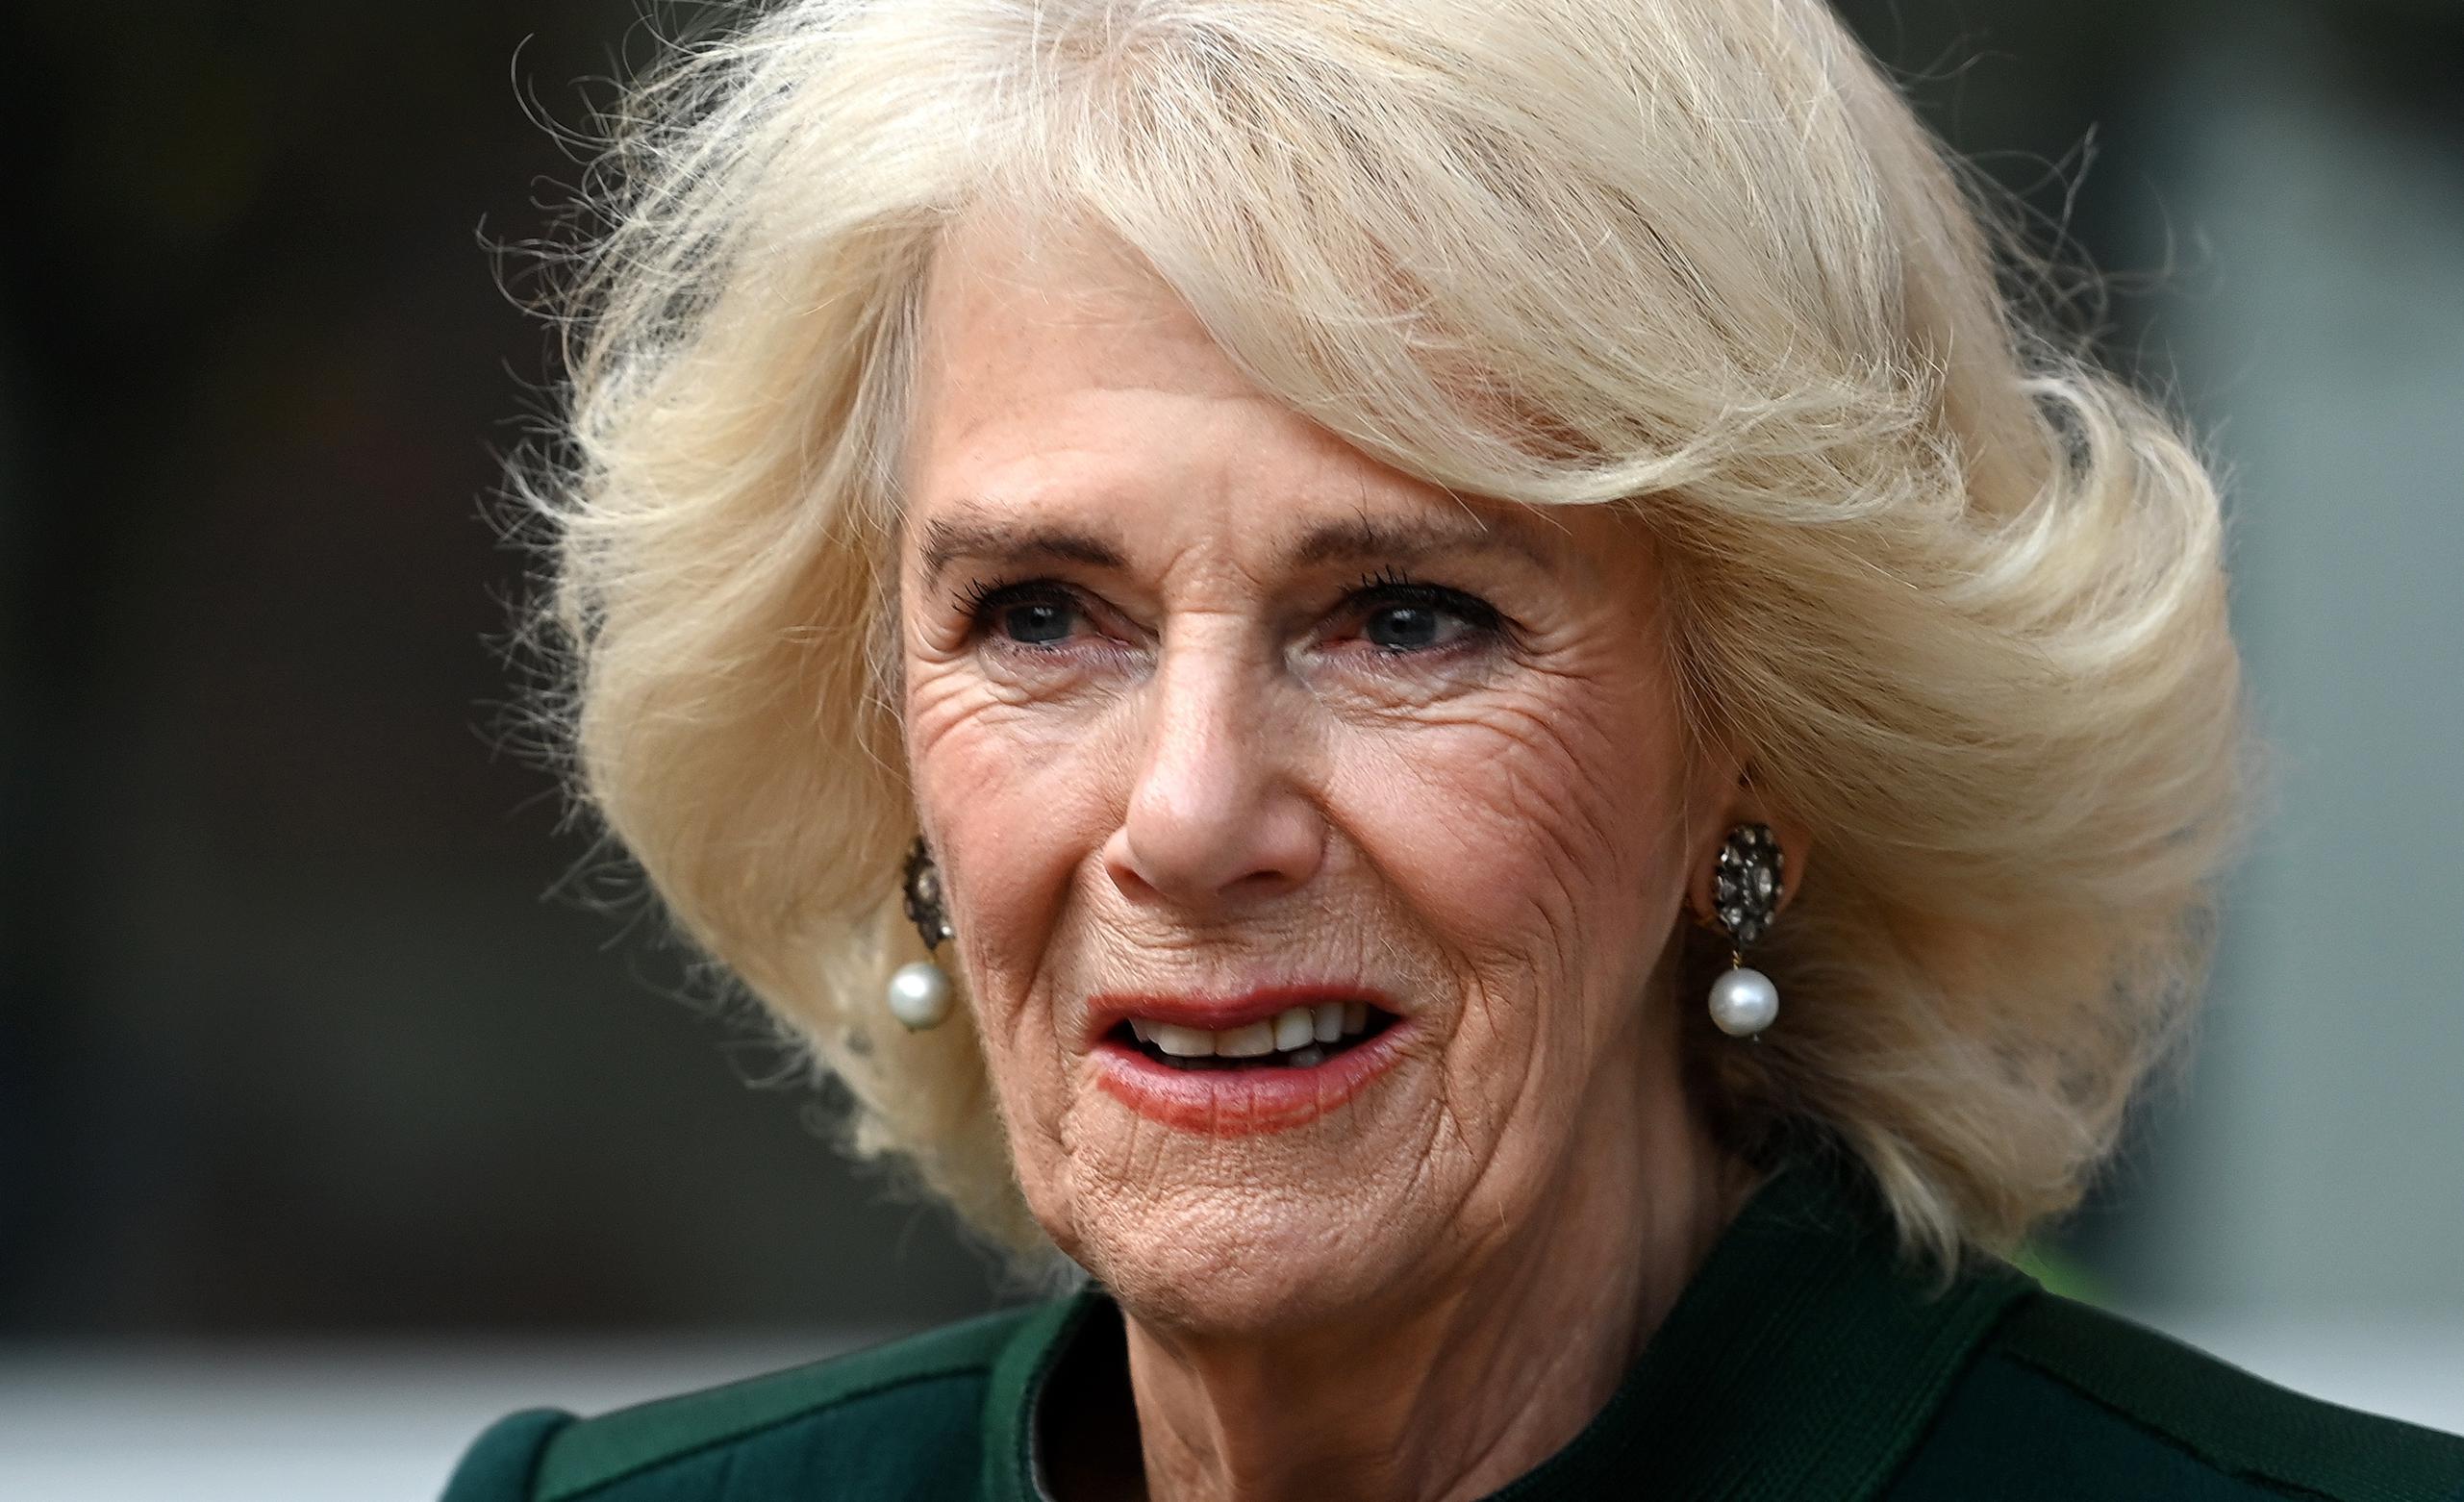 Camilla doesn't want ladies-in-waiting | The standard - World Today News